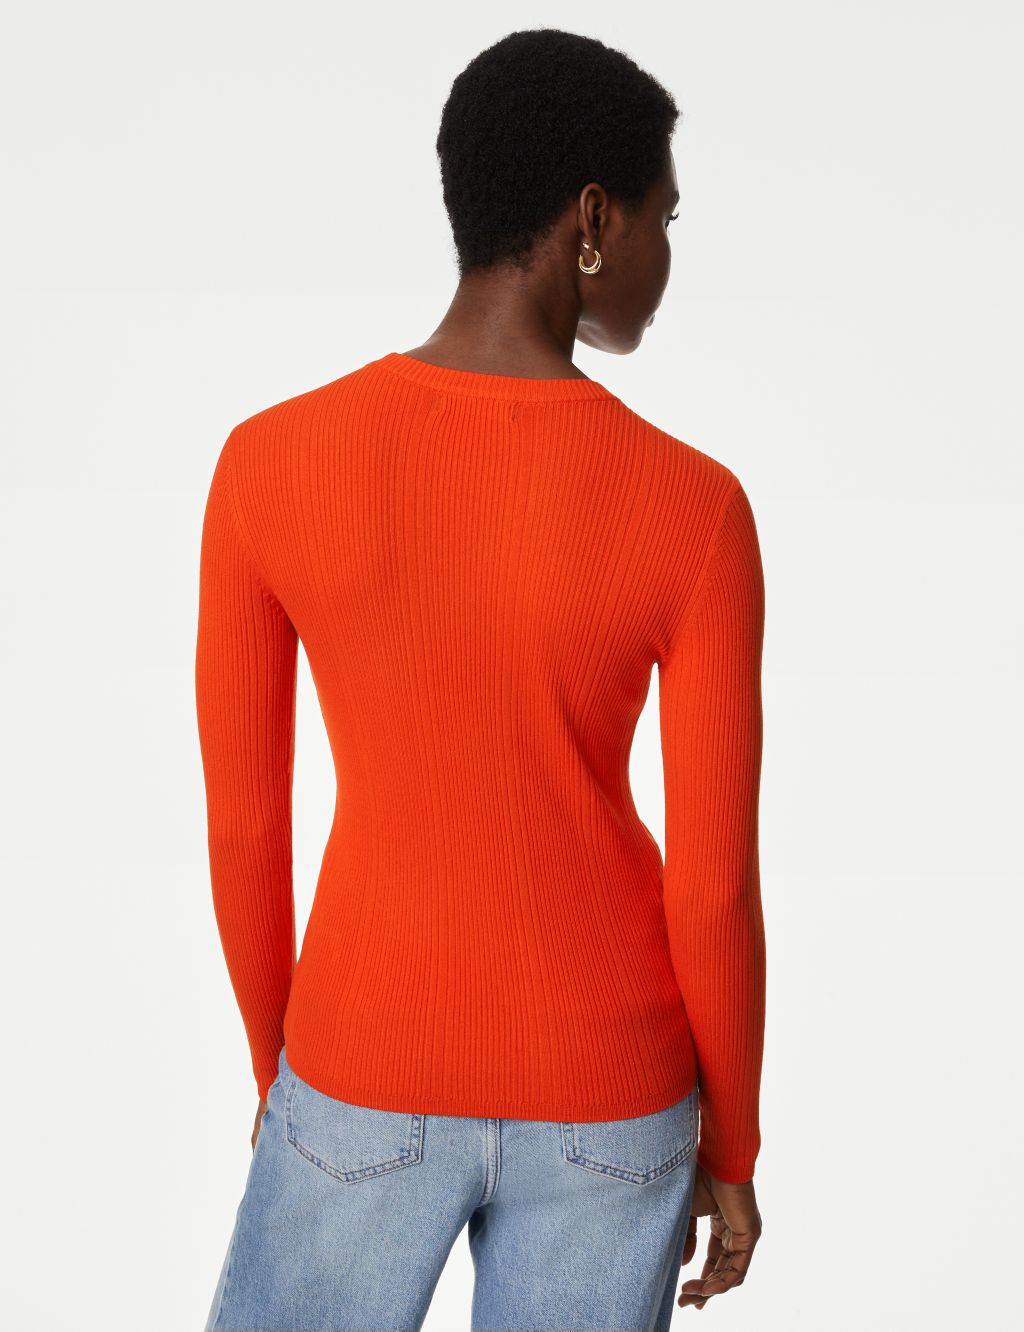 Ribbed Crew Neck Fitted Knitted Top image 5